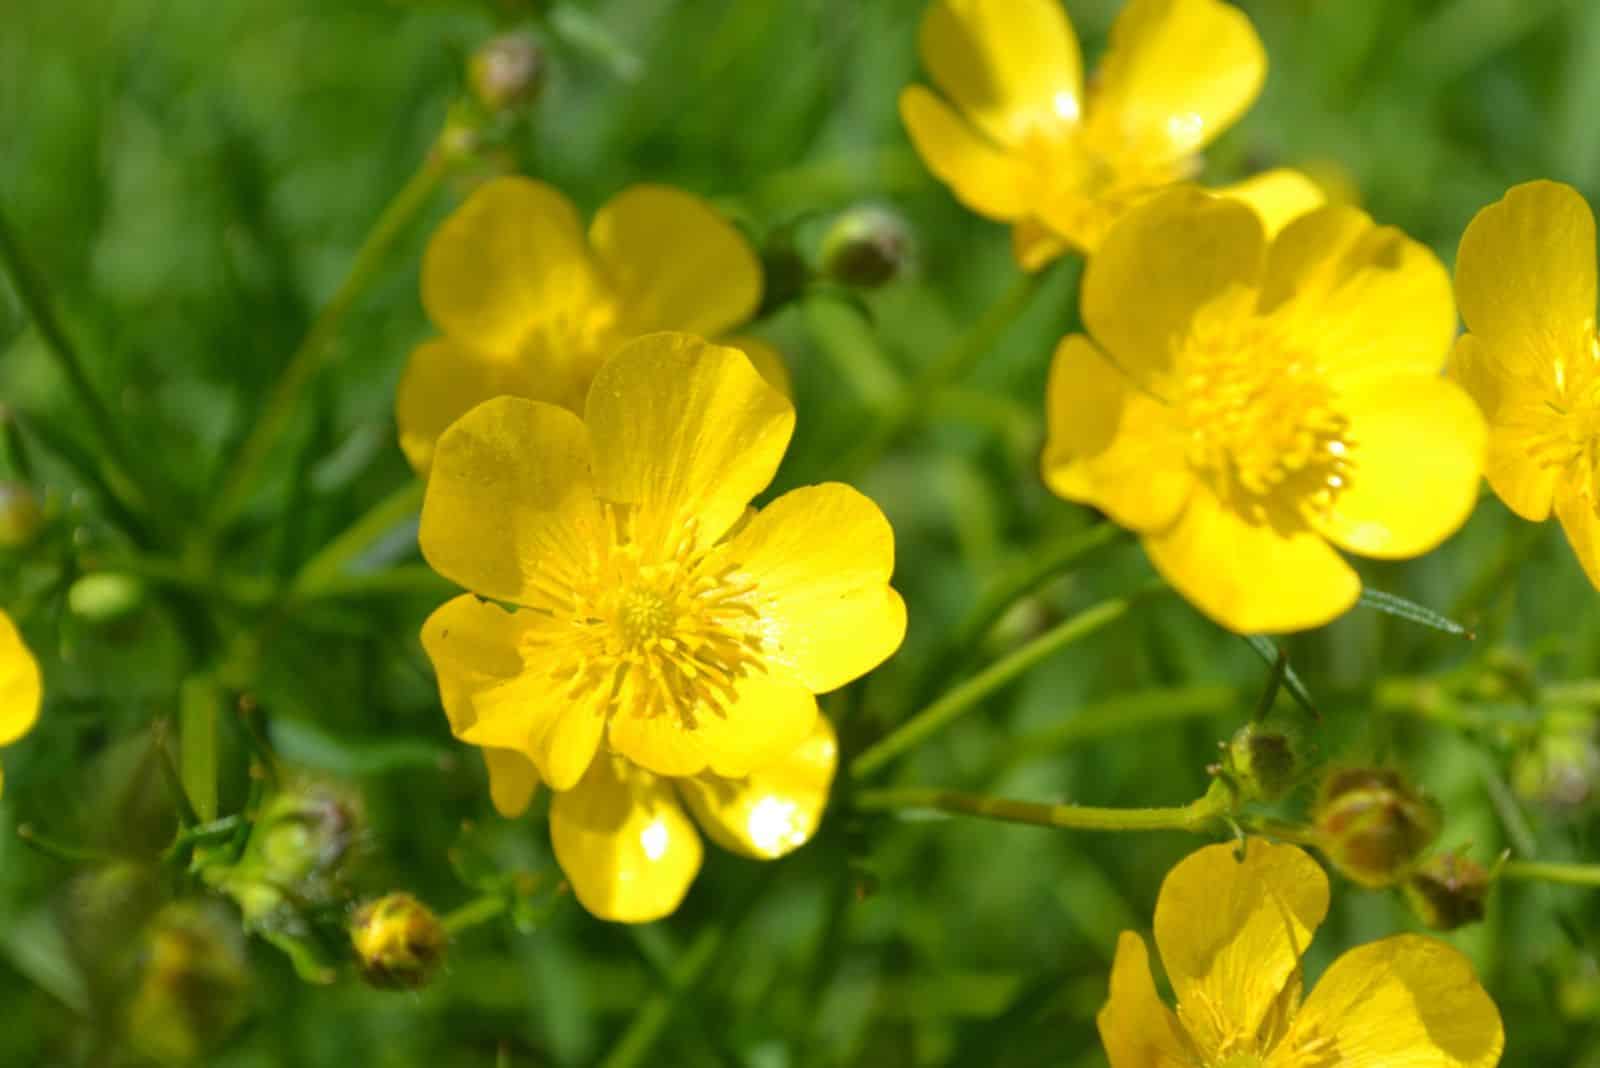 buttercups on the Green blurred background